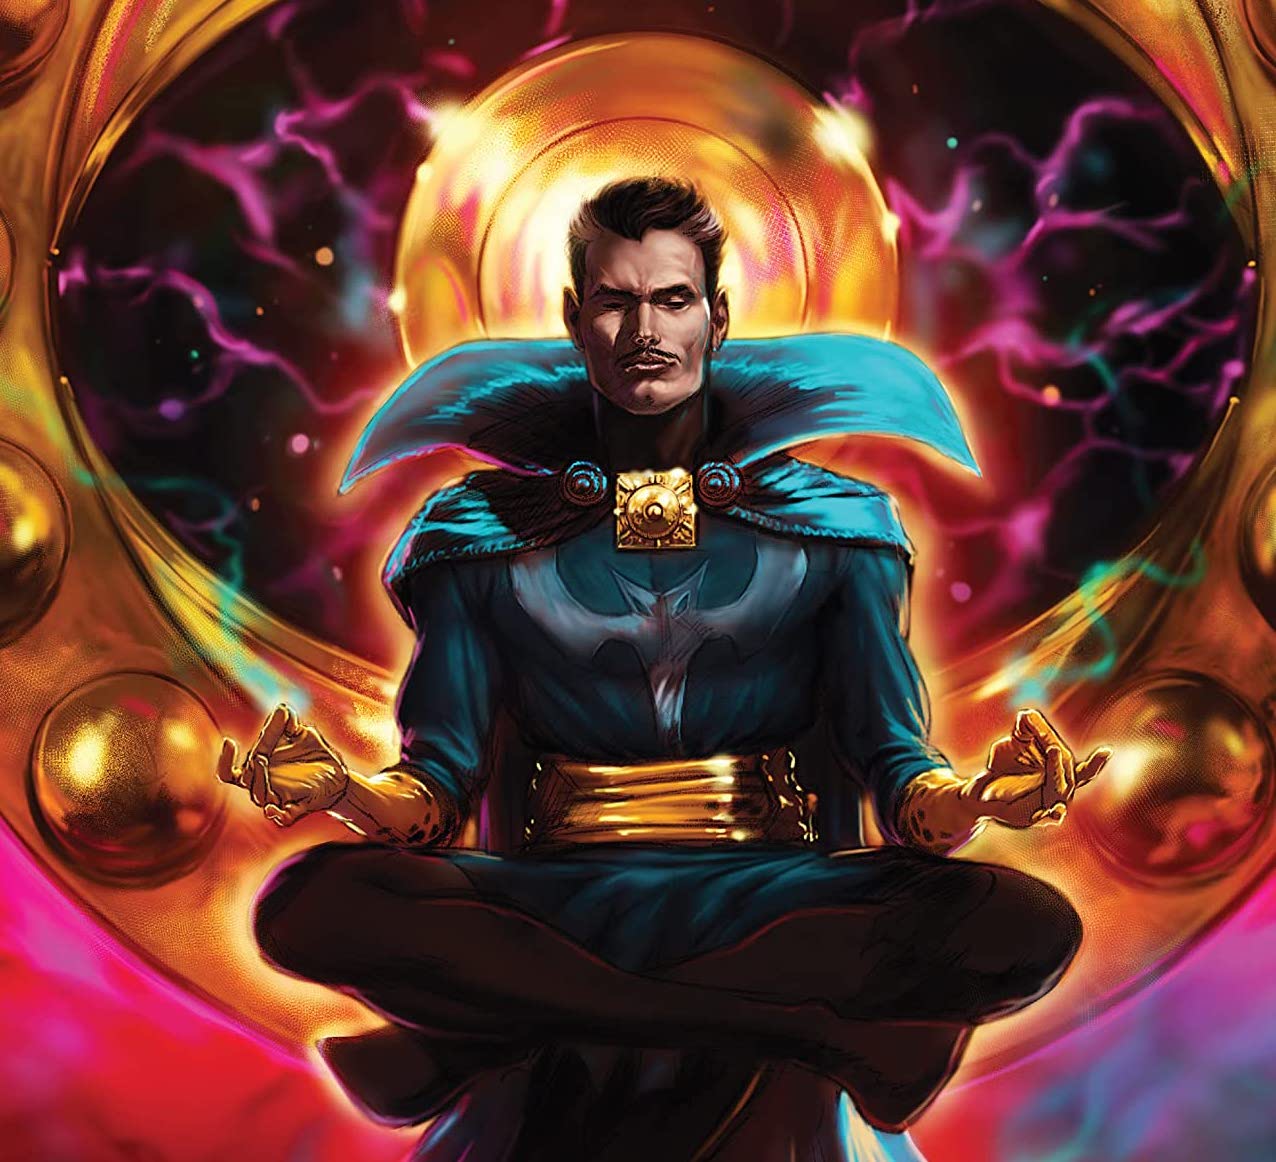 'The Death of Doctor Strange' #4 reveals the killer in a satisfying way